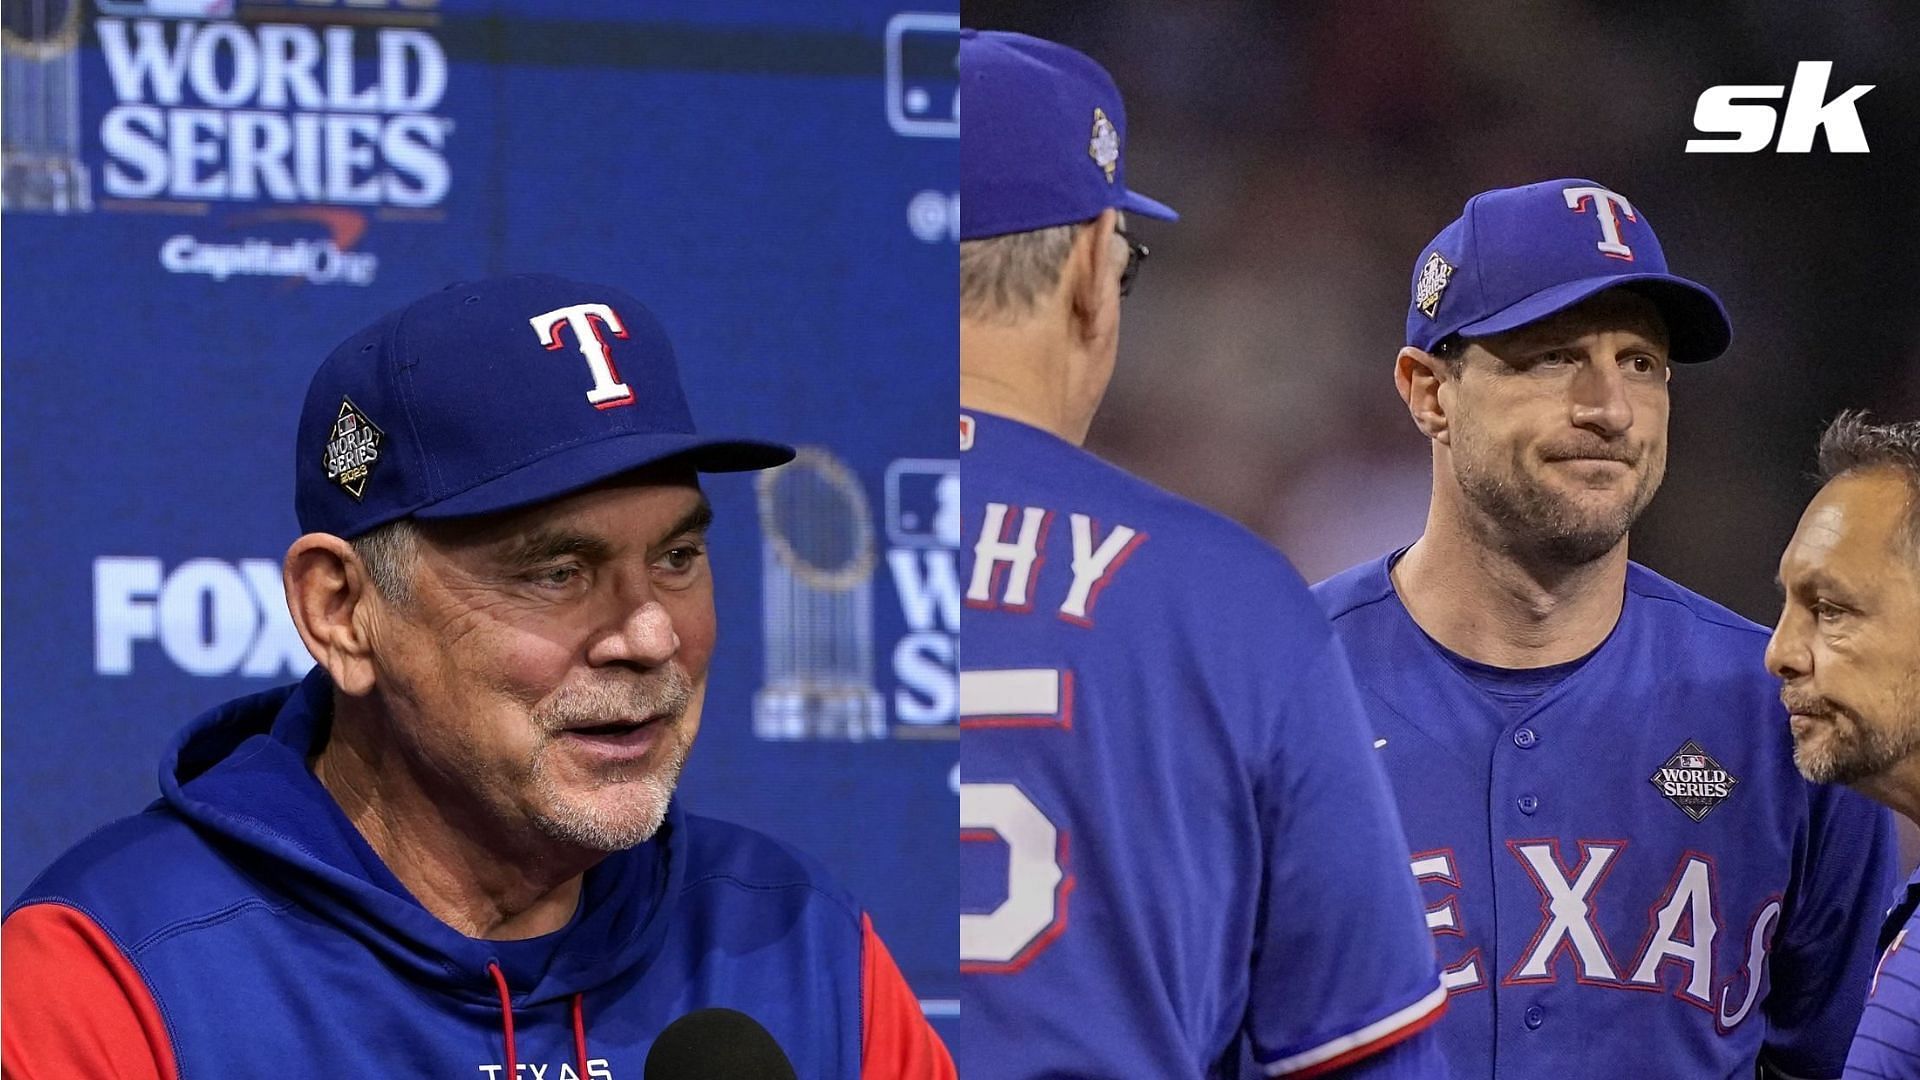 Bruce Bochy felt that Max Scherzer was probably cussing him out after a prank pulled by Jacob deGrom